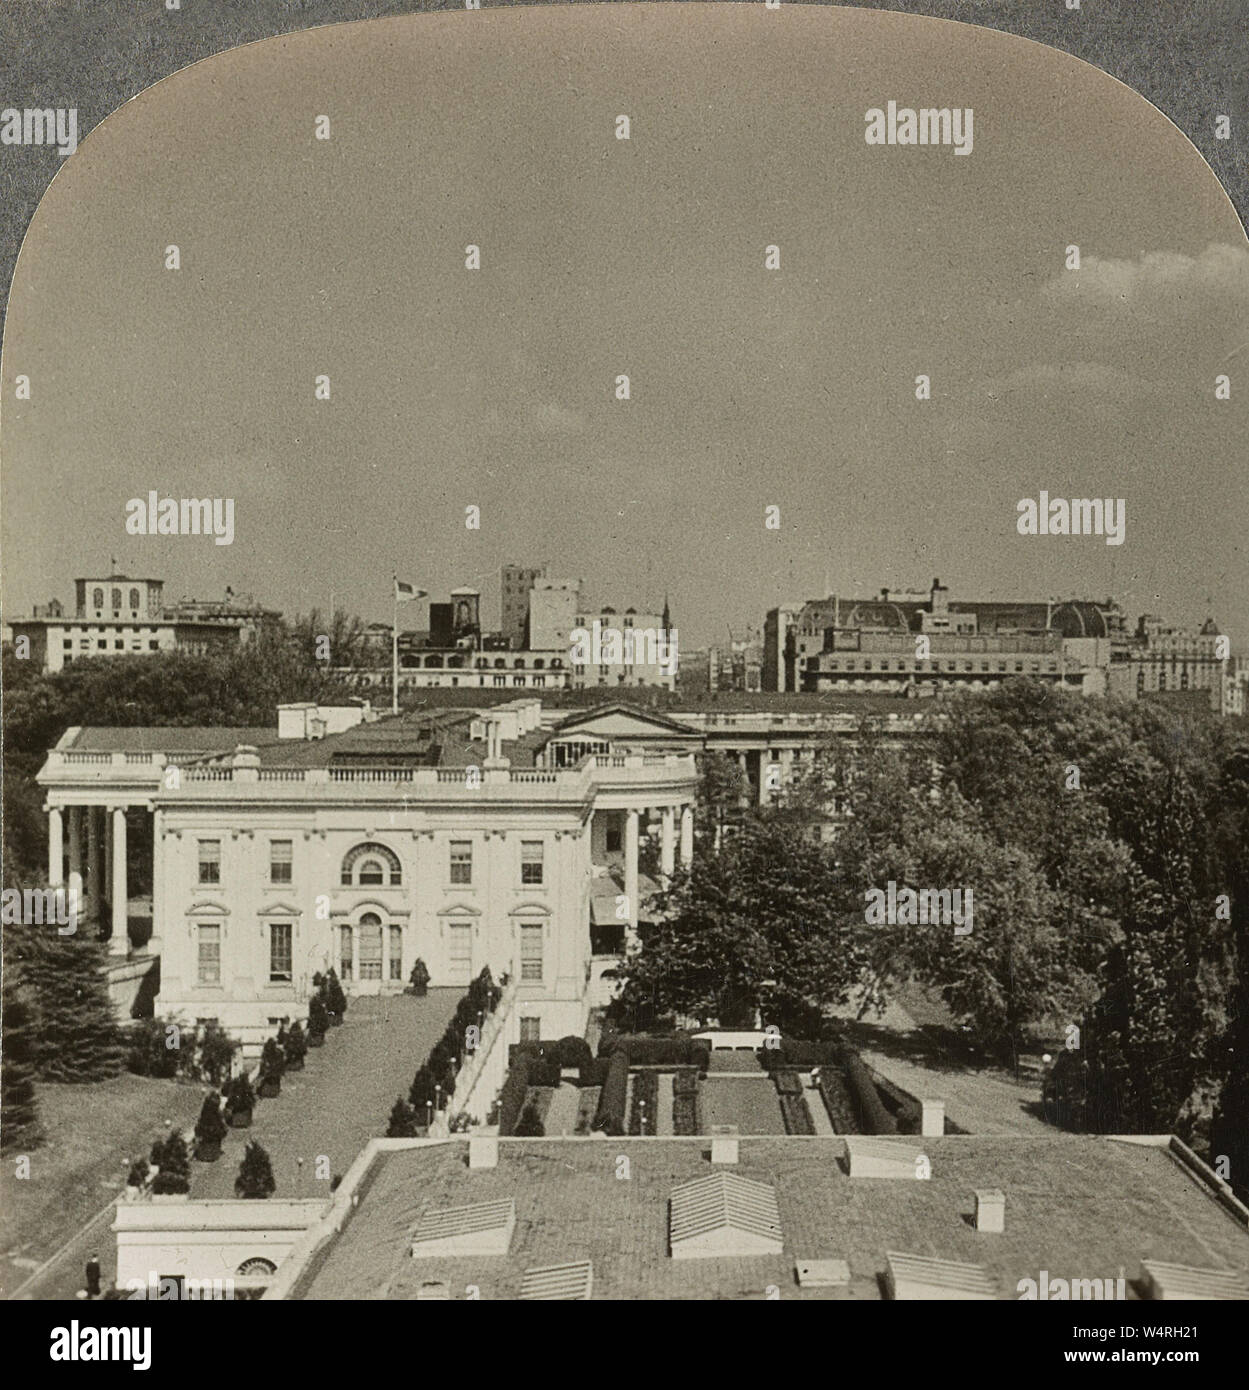 The White House from the Executive Offices in 1935. The White House is the official residence and workplace of the president of the United States. It is located at 1600 Pennsylvania Avenue NW in Washington, D.C. and has been the residence of every U.S. president since John Adams in 1800. Stock Photo